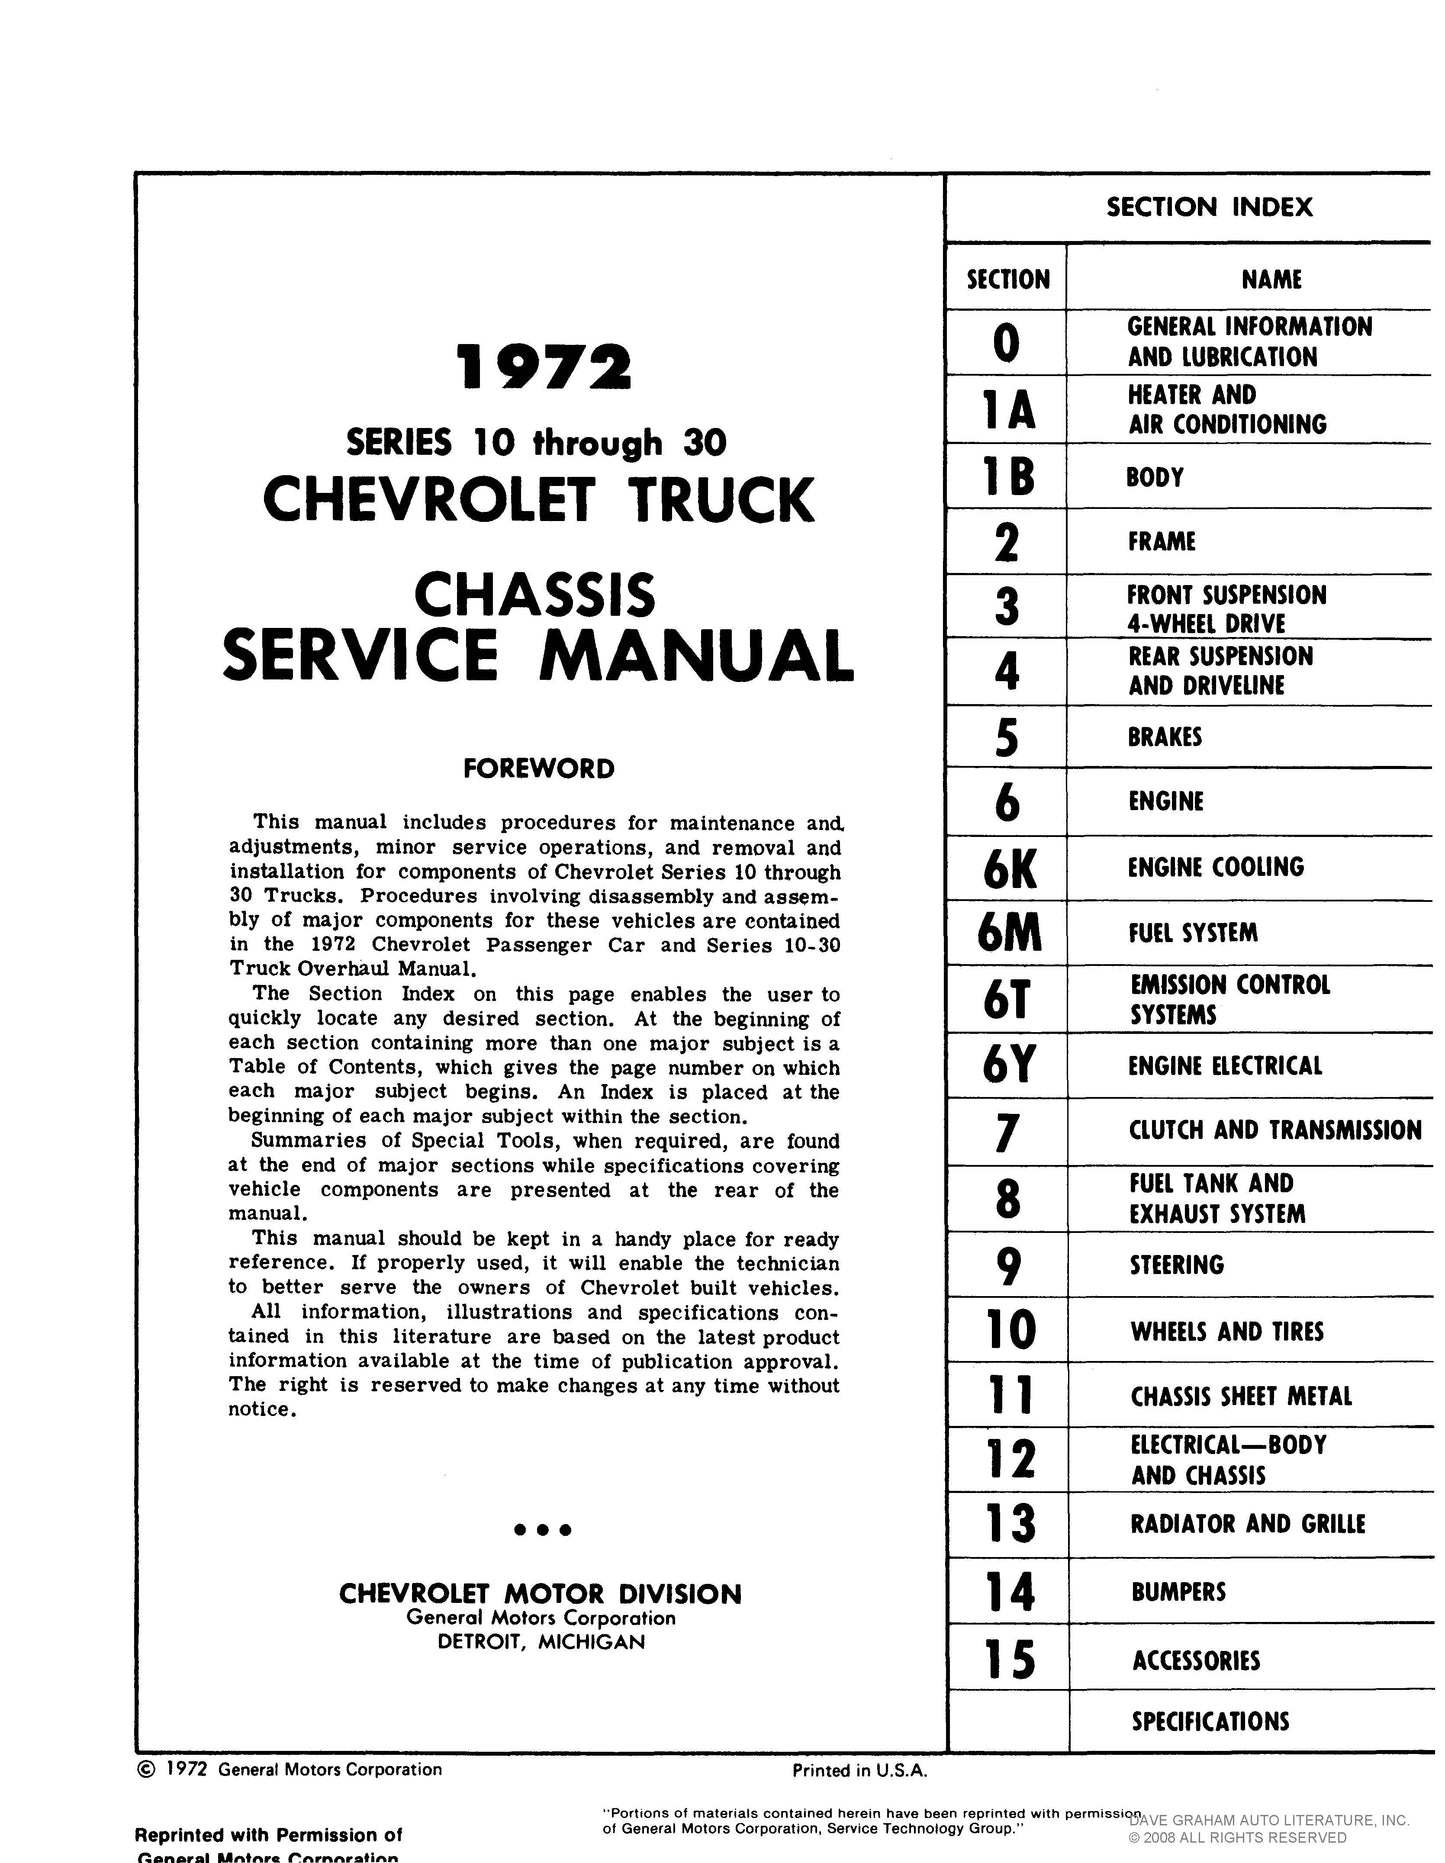 1972 Chevy Shop, Overhaul, & Body Manuals- All Models